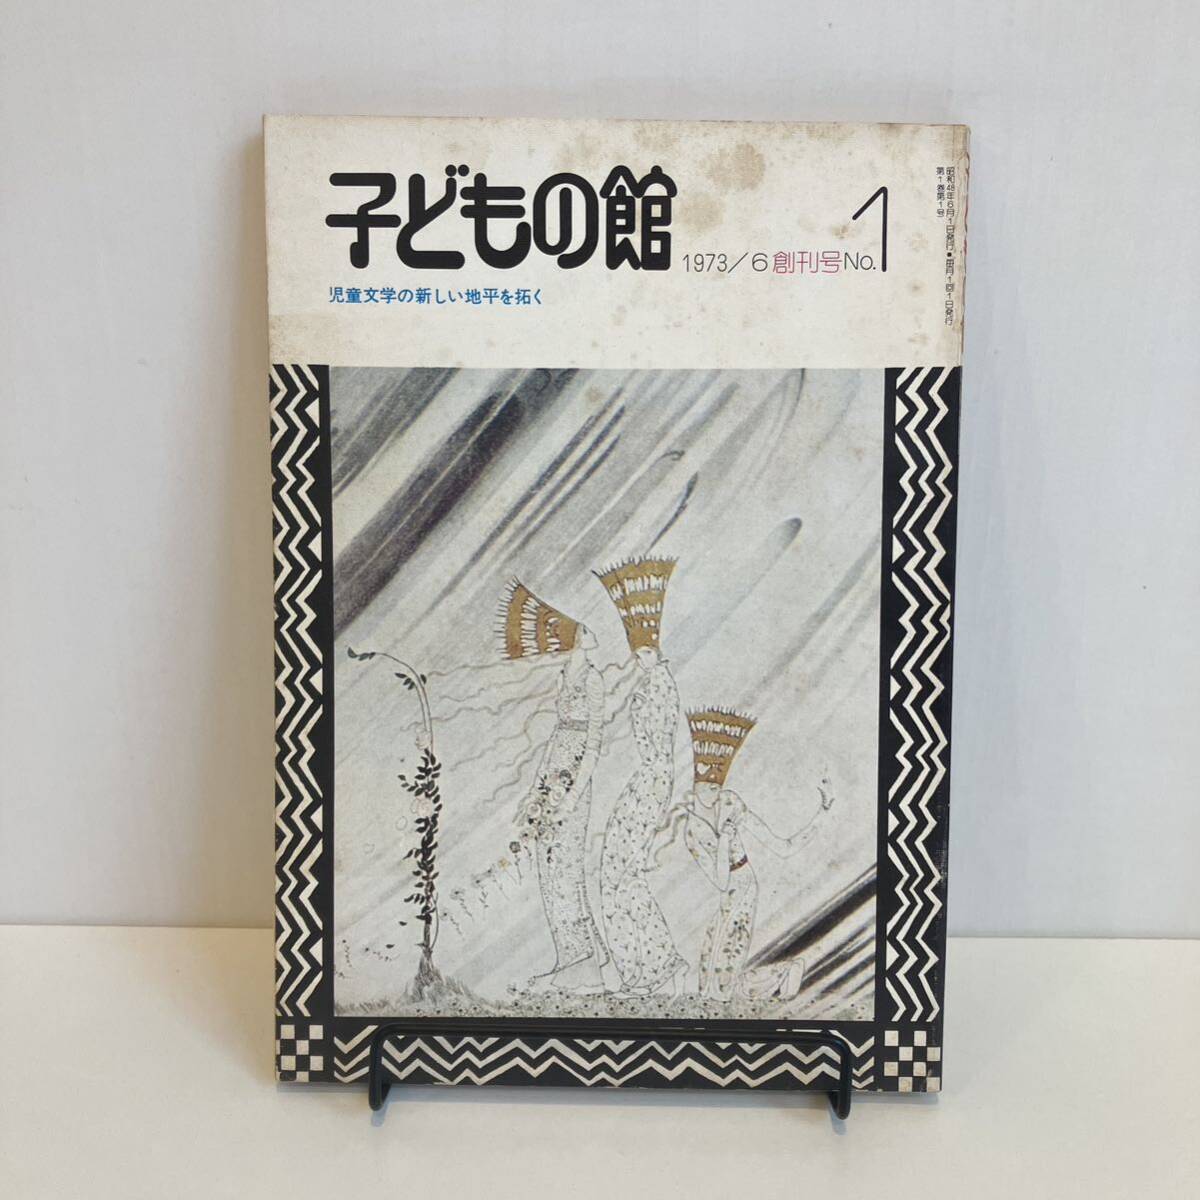 240518[ child. pavilion ].. number 1973 year 6 month number No.1* kai * Neal sen tree under sequence two inside rice field ... Watanabe . man . inside . one * picture book luck sound pavilion bookstore old book magazine 